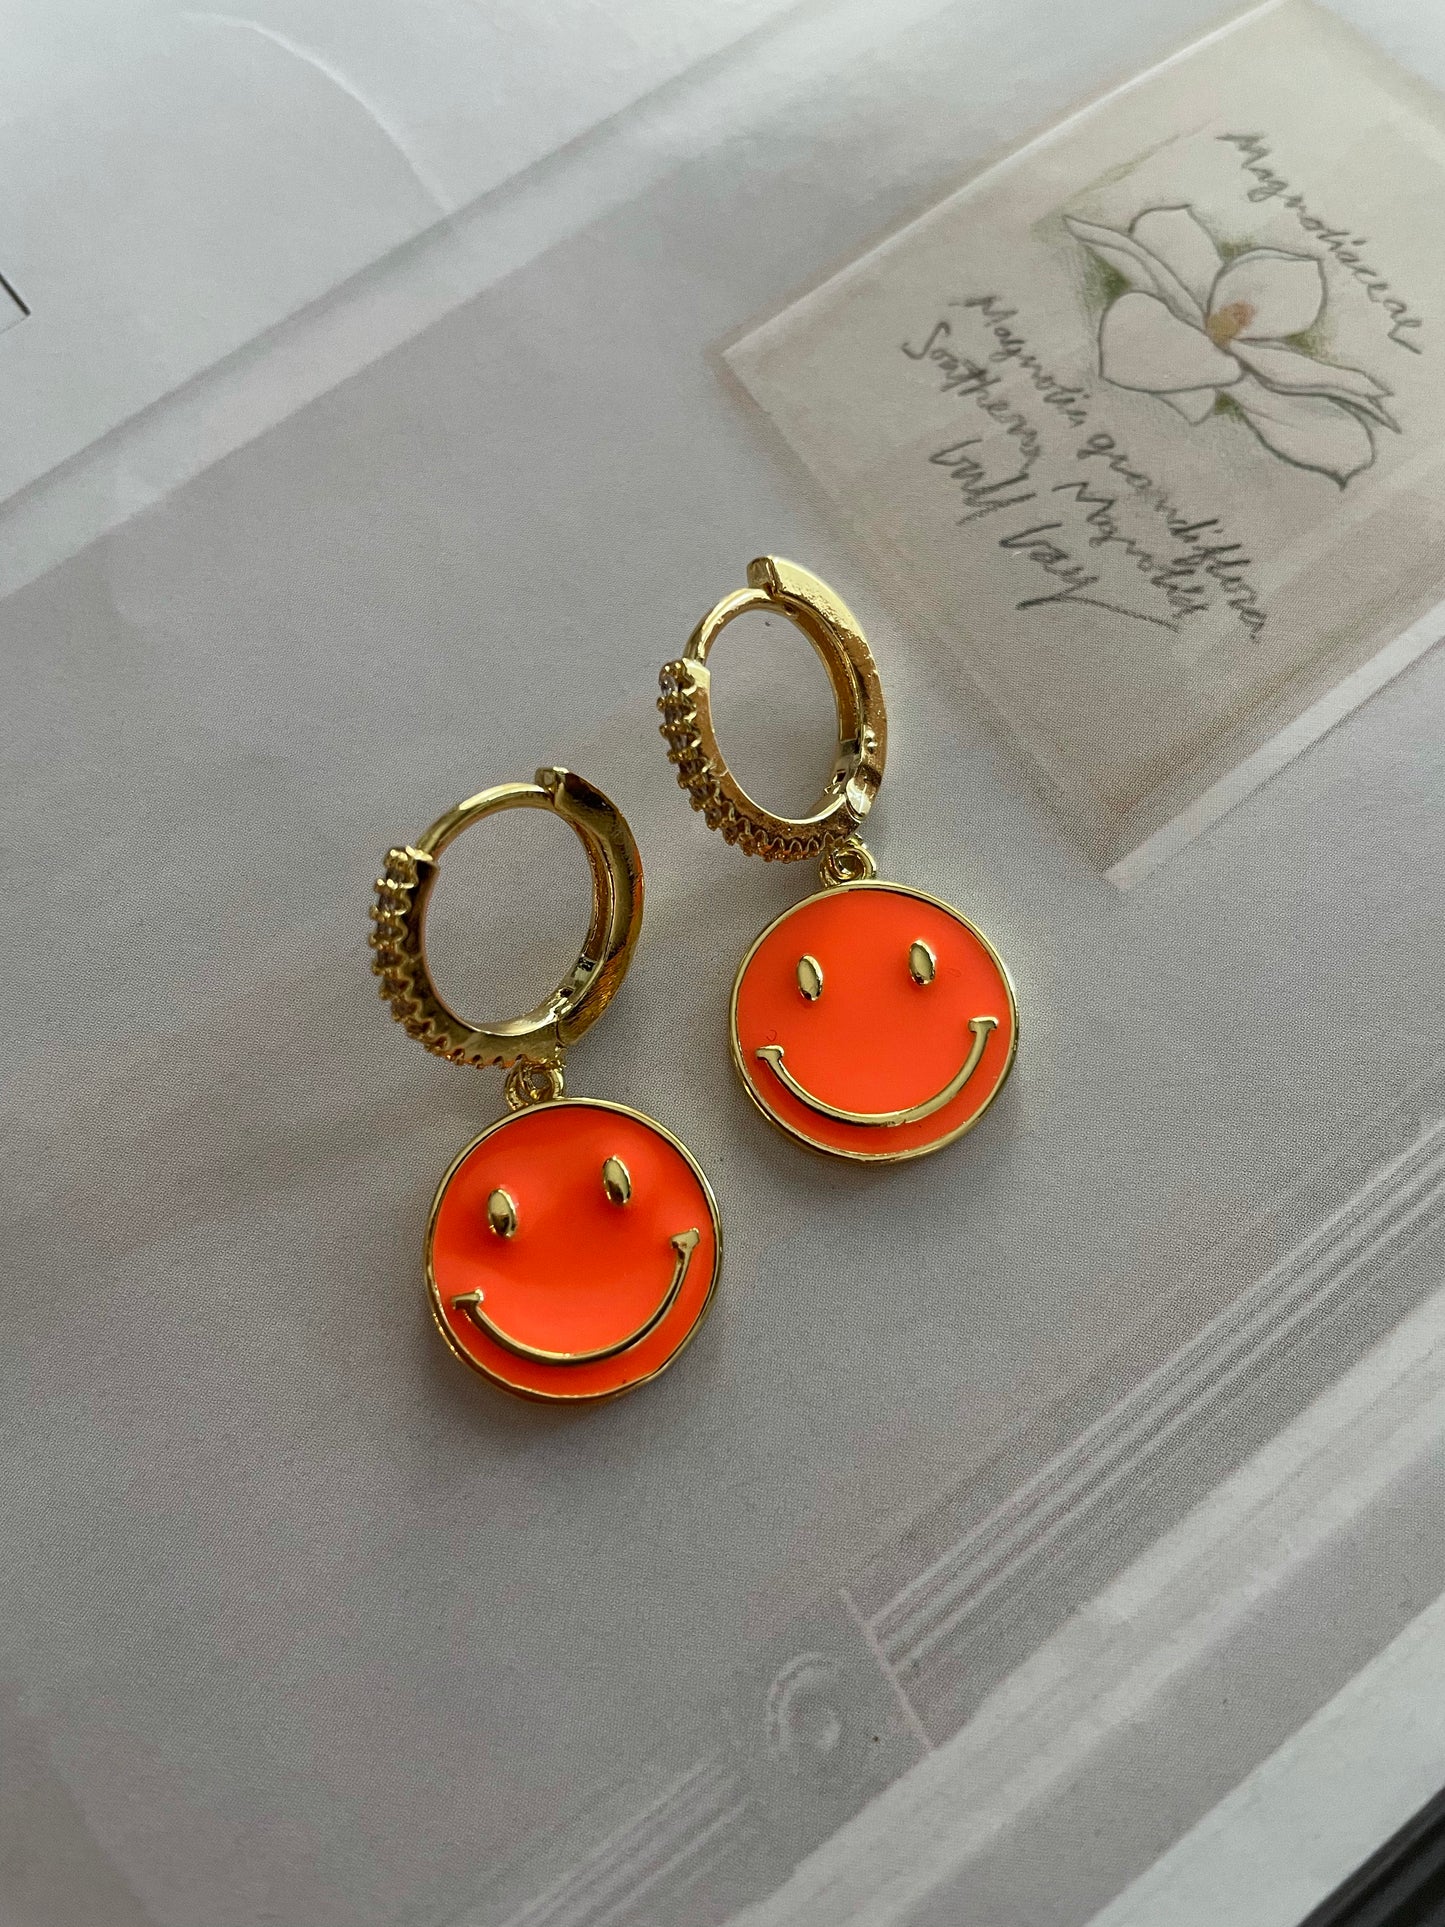 Colored Happy Face earrings